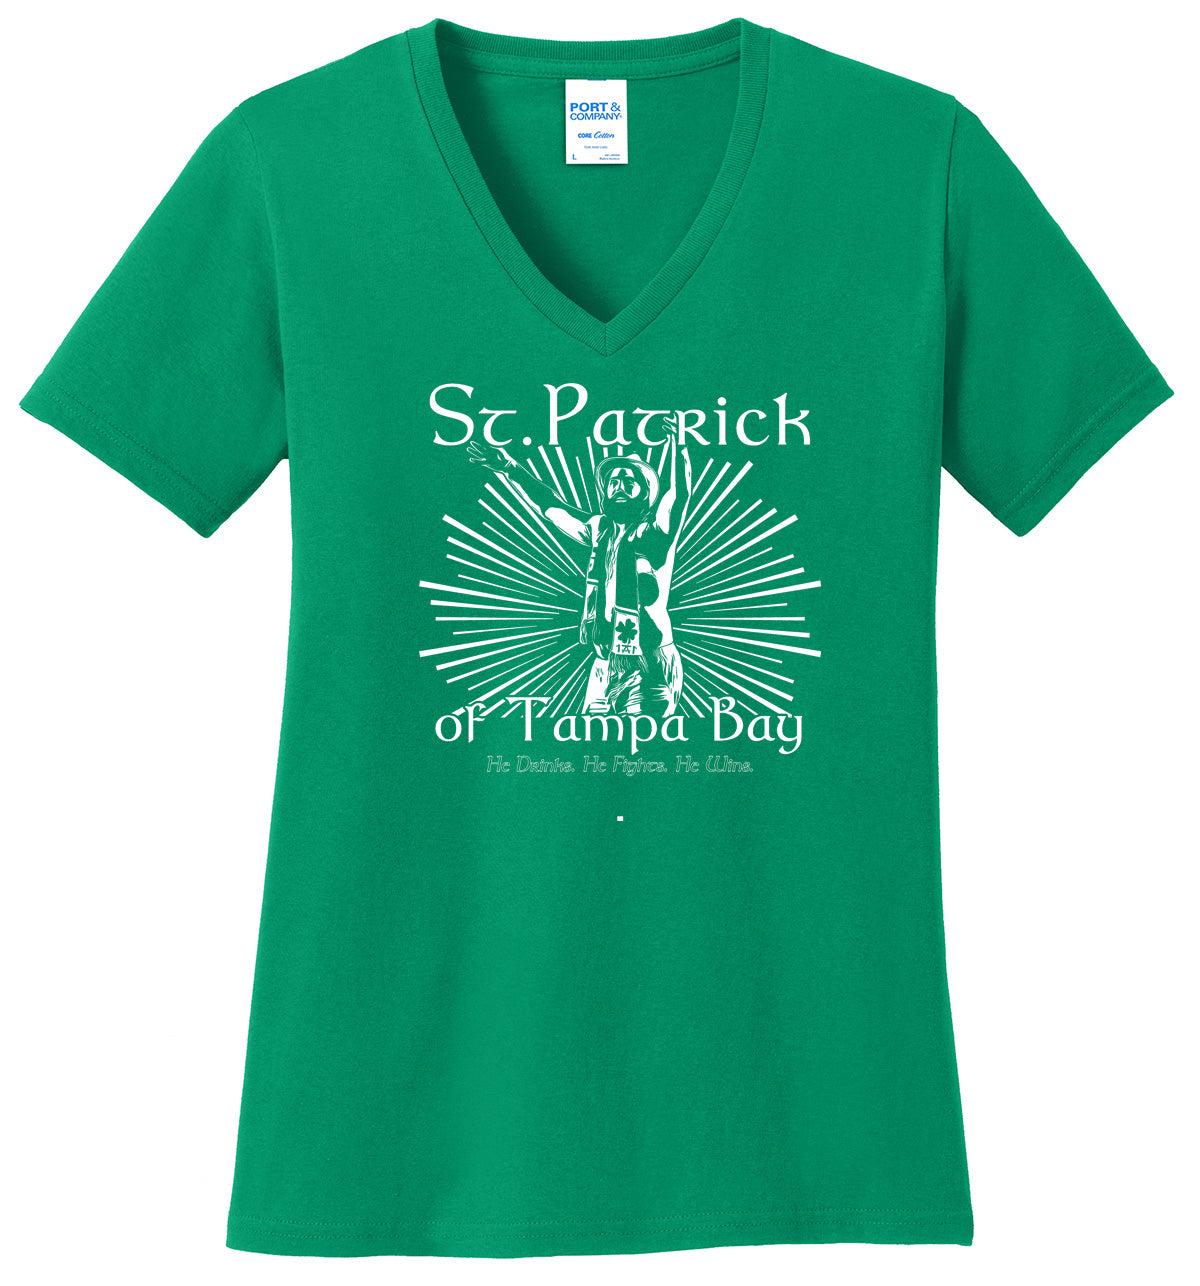 green shirt st. patrick day shirt featuring pat maroon of the tampa bay lightning locally made in st. pete st. petersburg